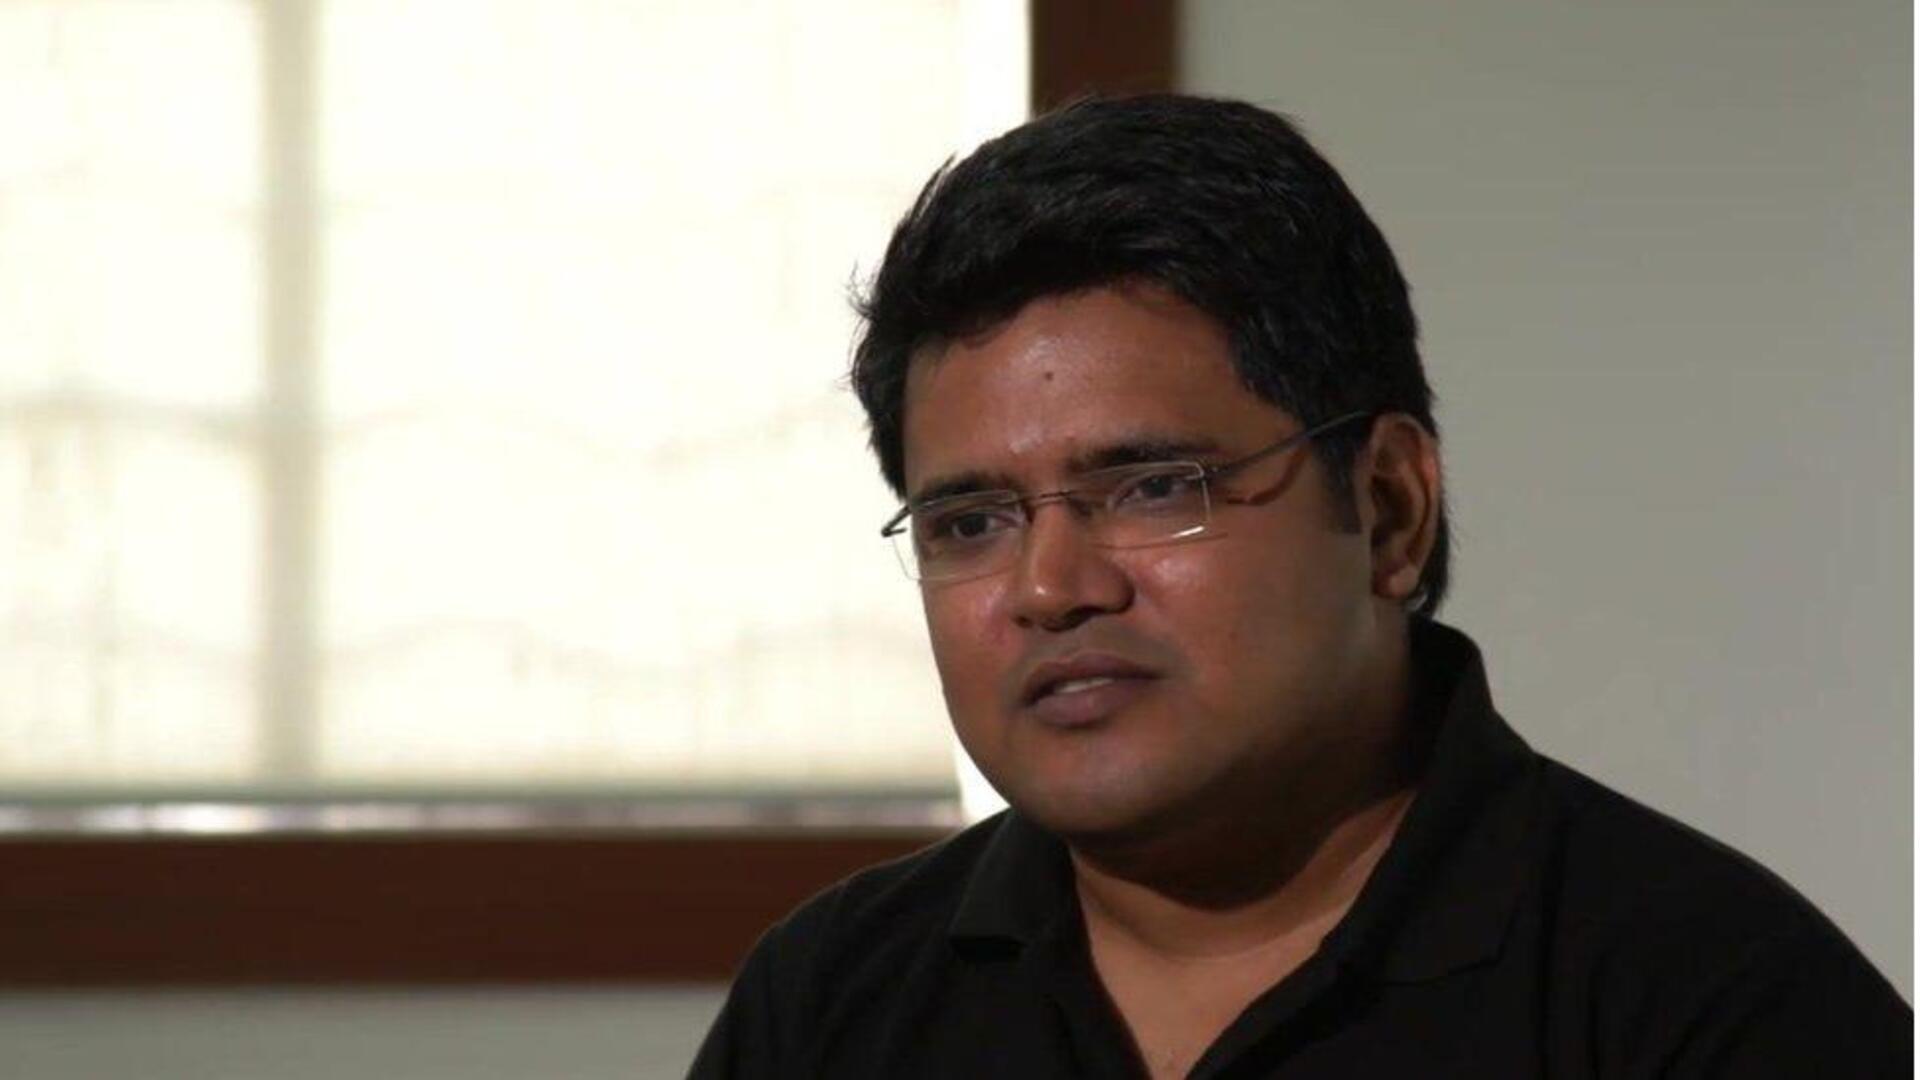 PhonePe-backed Indus Appstore's CEO Rakesh Deshmukh steps down: What's next